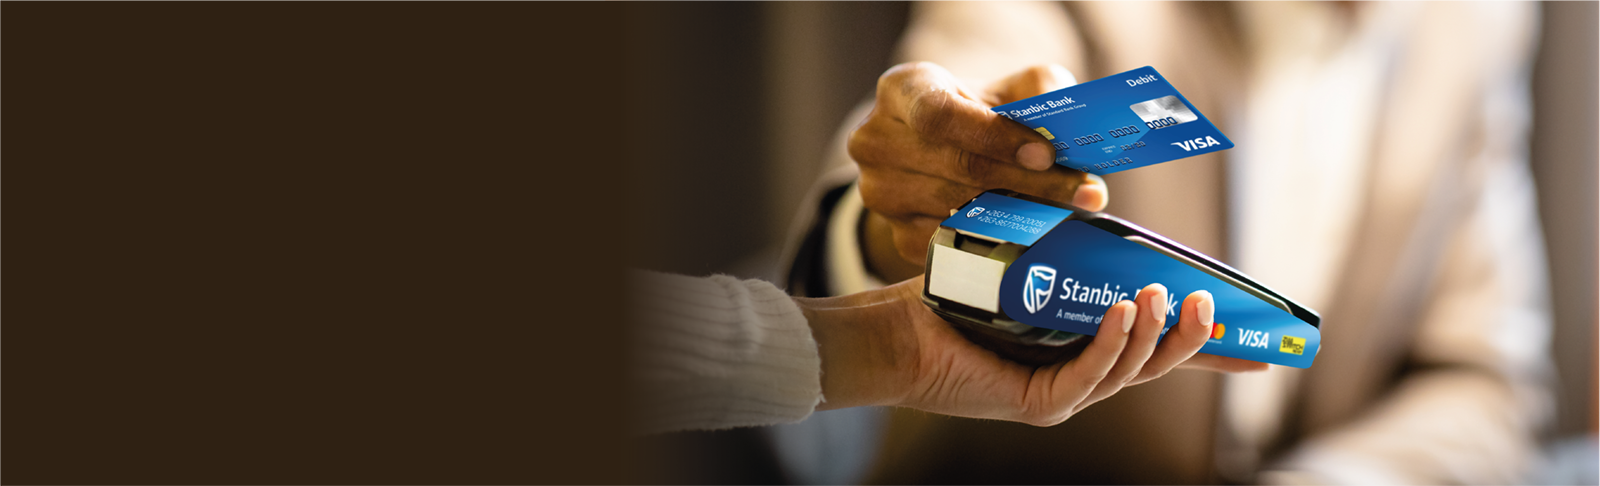 Contactless is the new way to pay